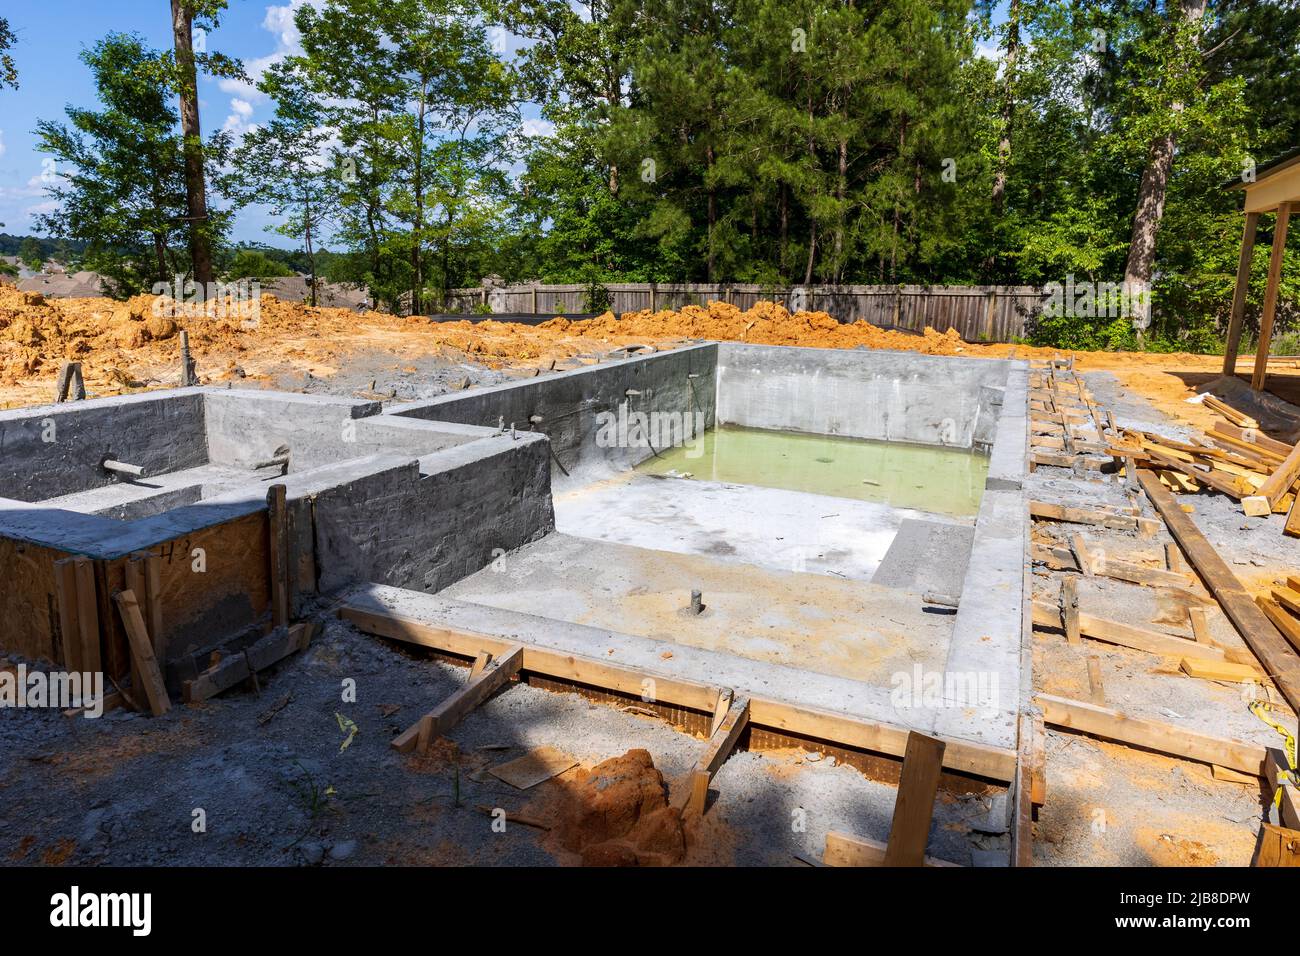 New swimming pool being constructed Stock Photo